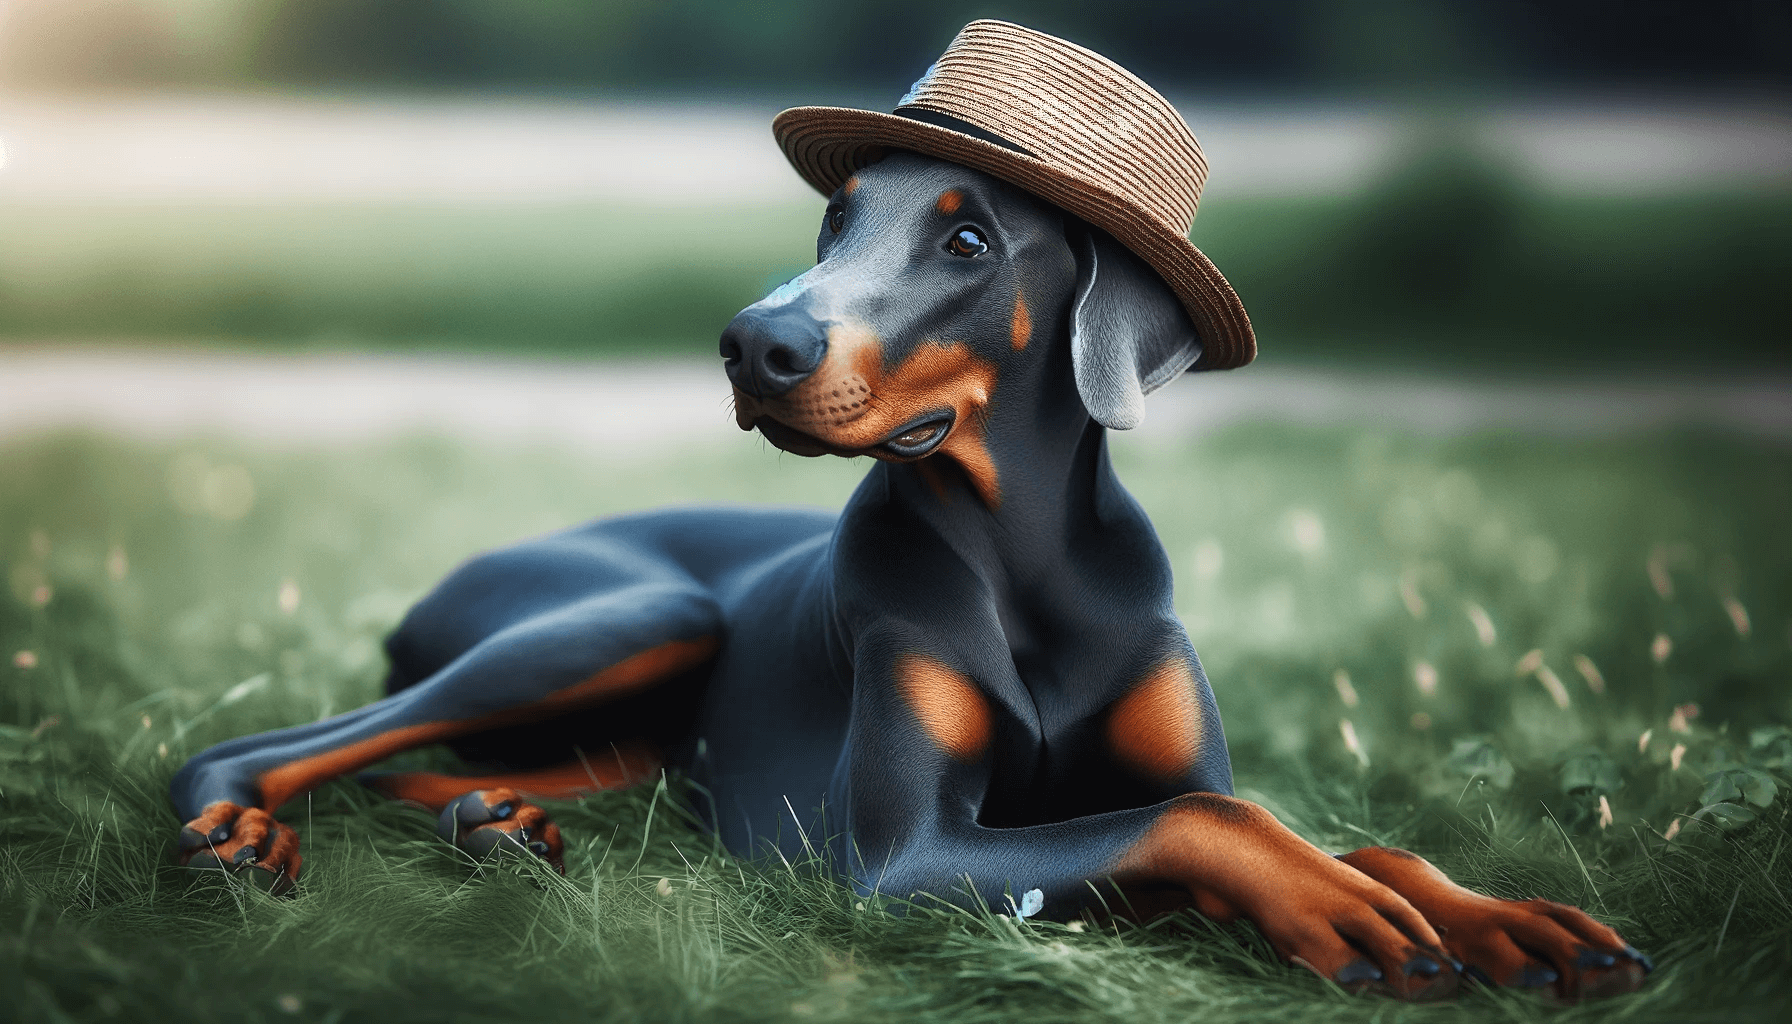 A relaxed Blue Doberman lying on grass with a relaxed posture, looking attentively to the side.